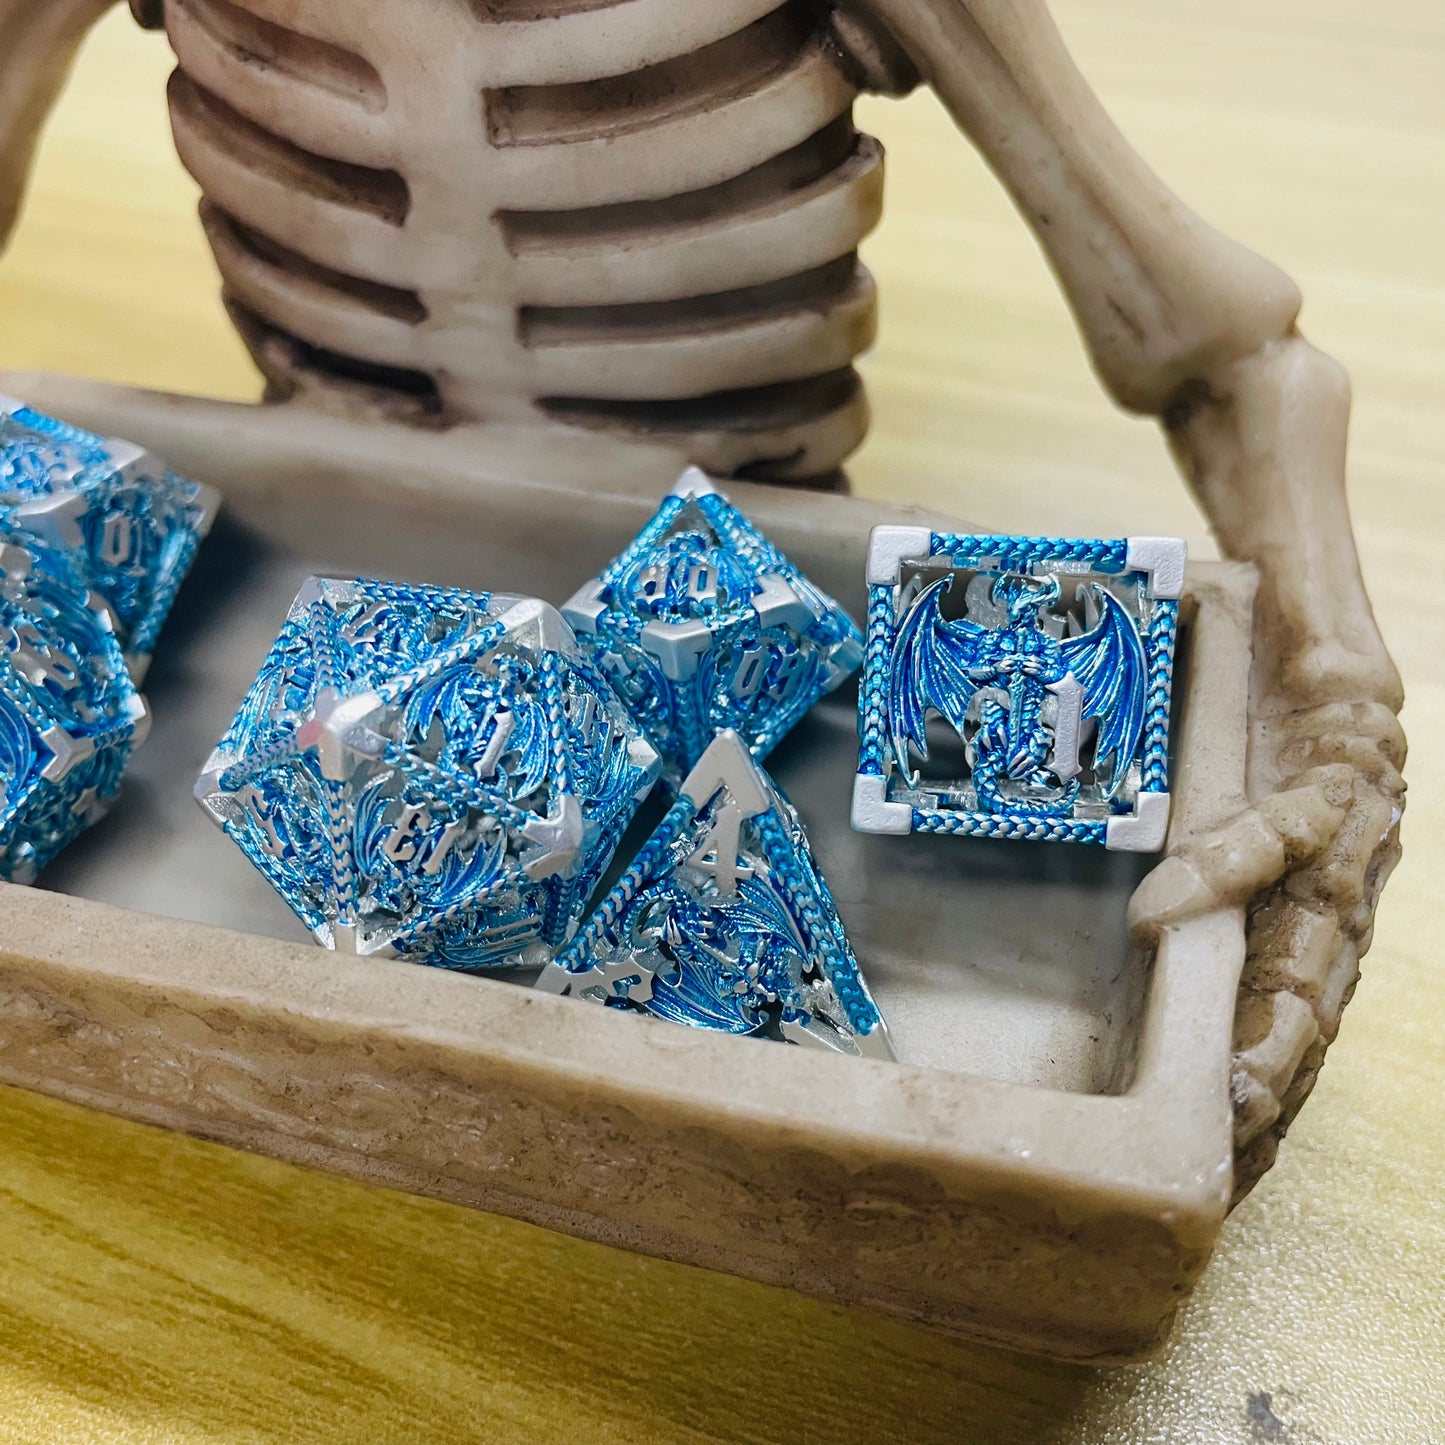 FREE Today: Dragon Sword Blue Hollow Metal Dice (Give away an additional random dice set)